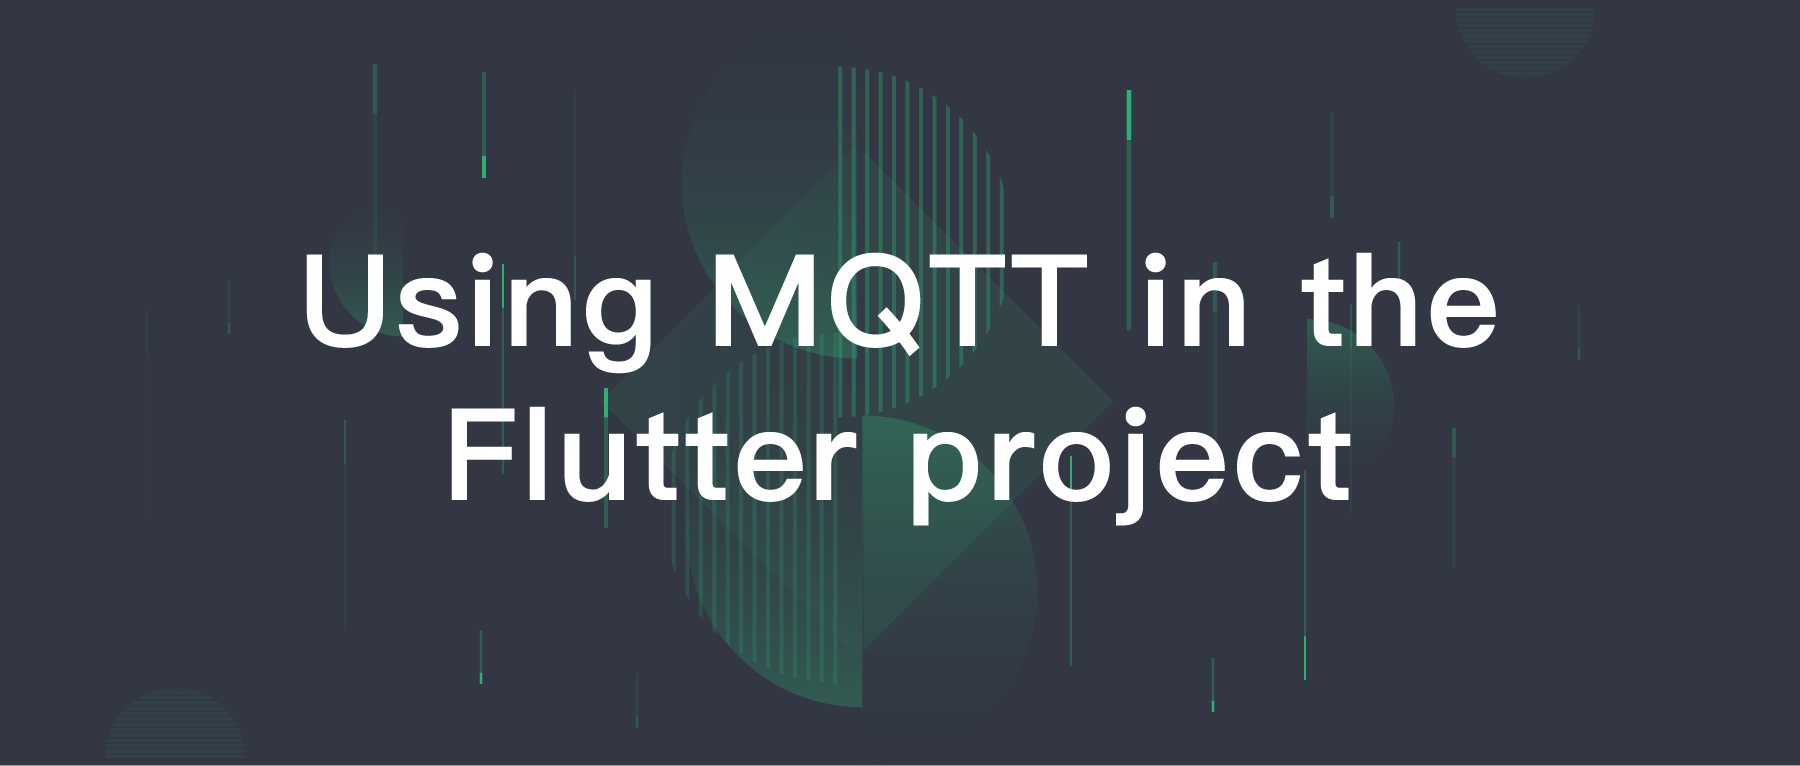 Using MQTT in the Flutter project